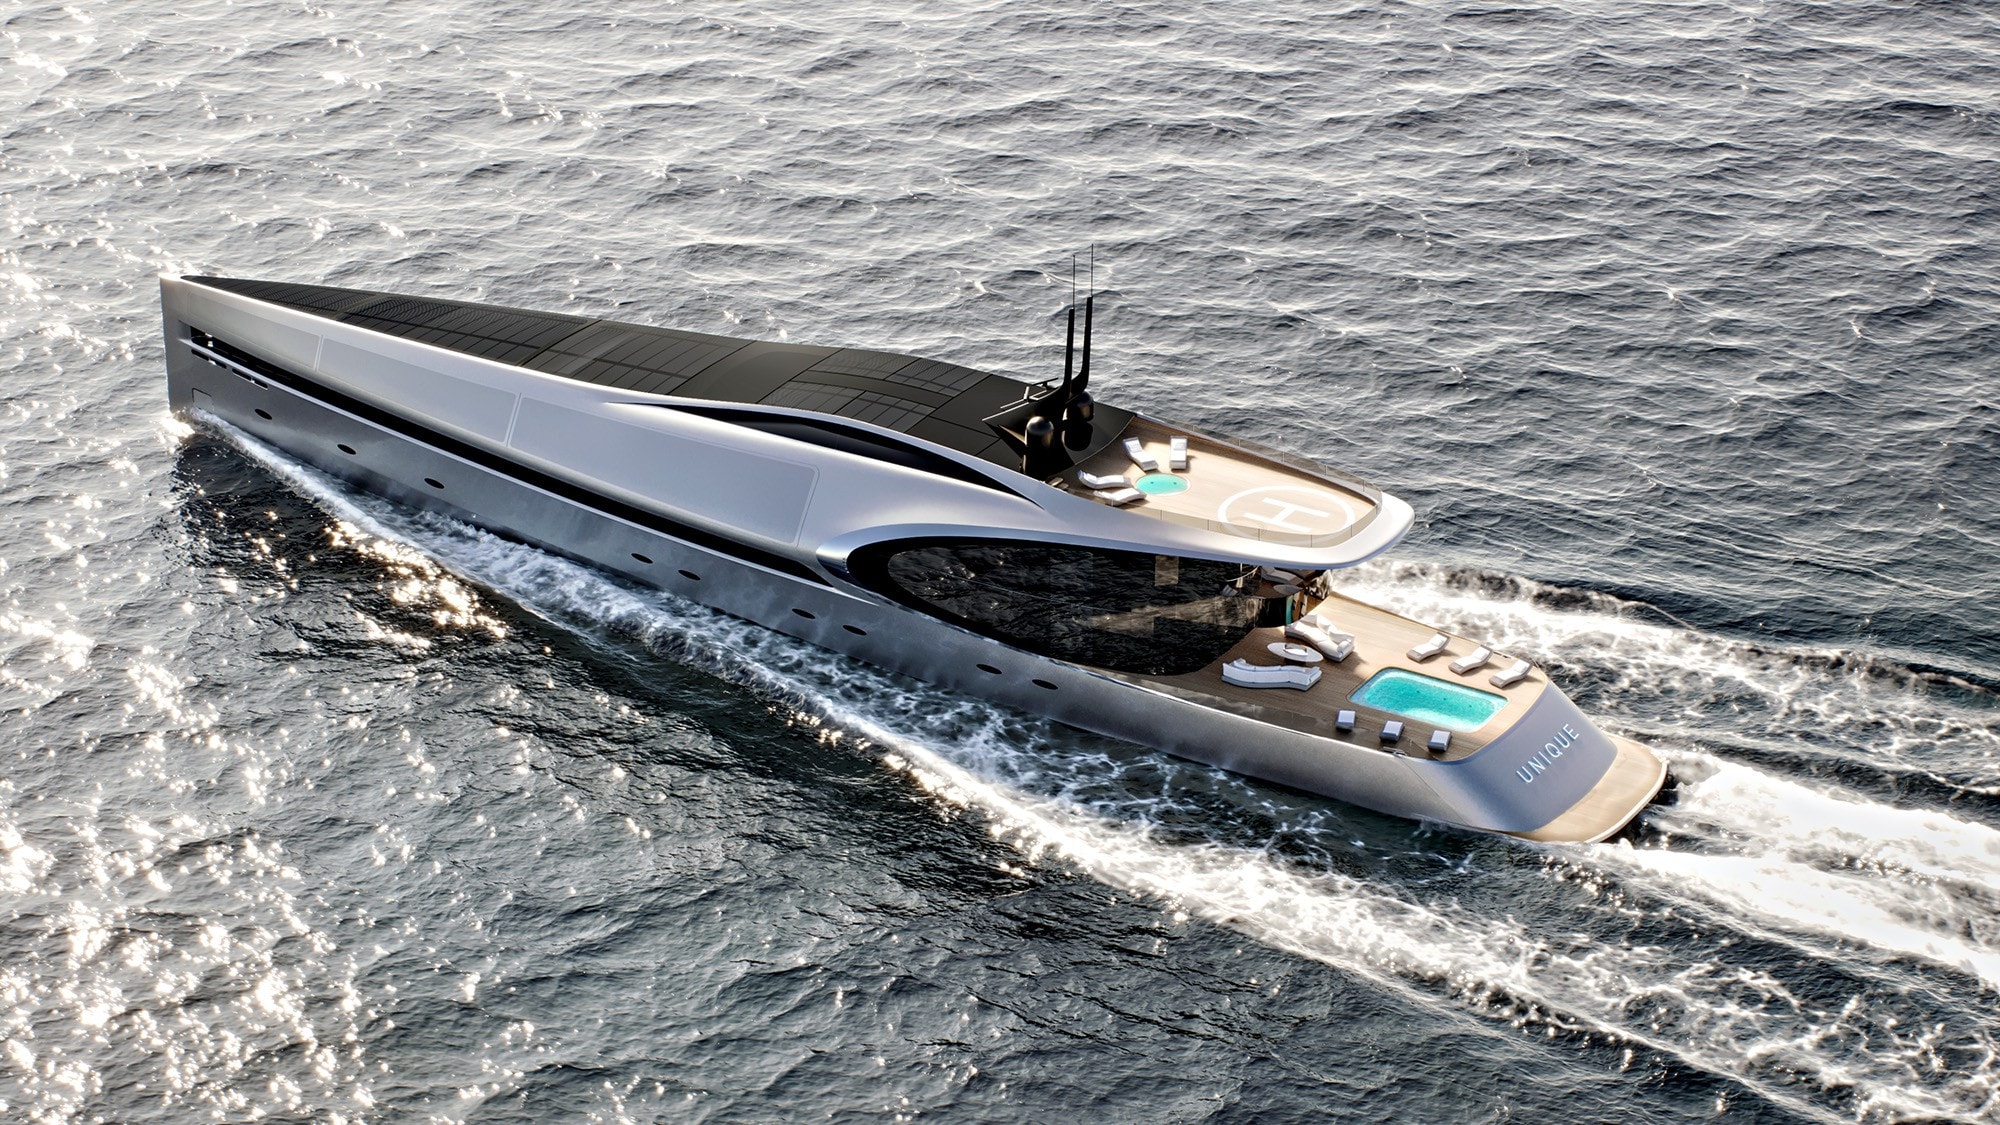 A guide to superyacht design features